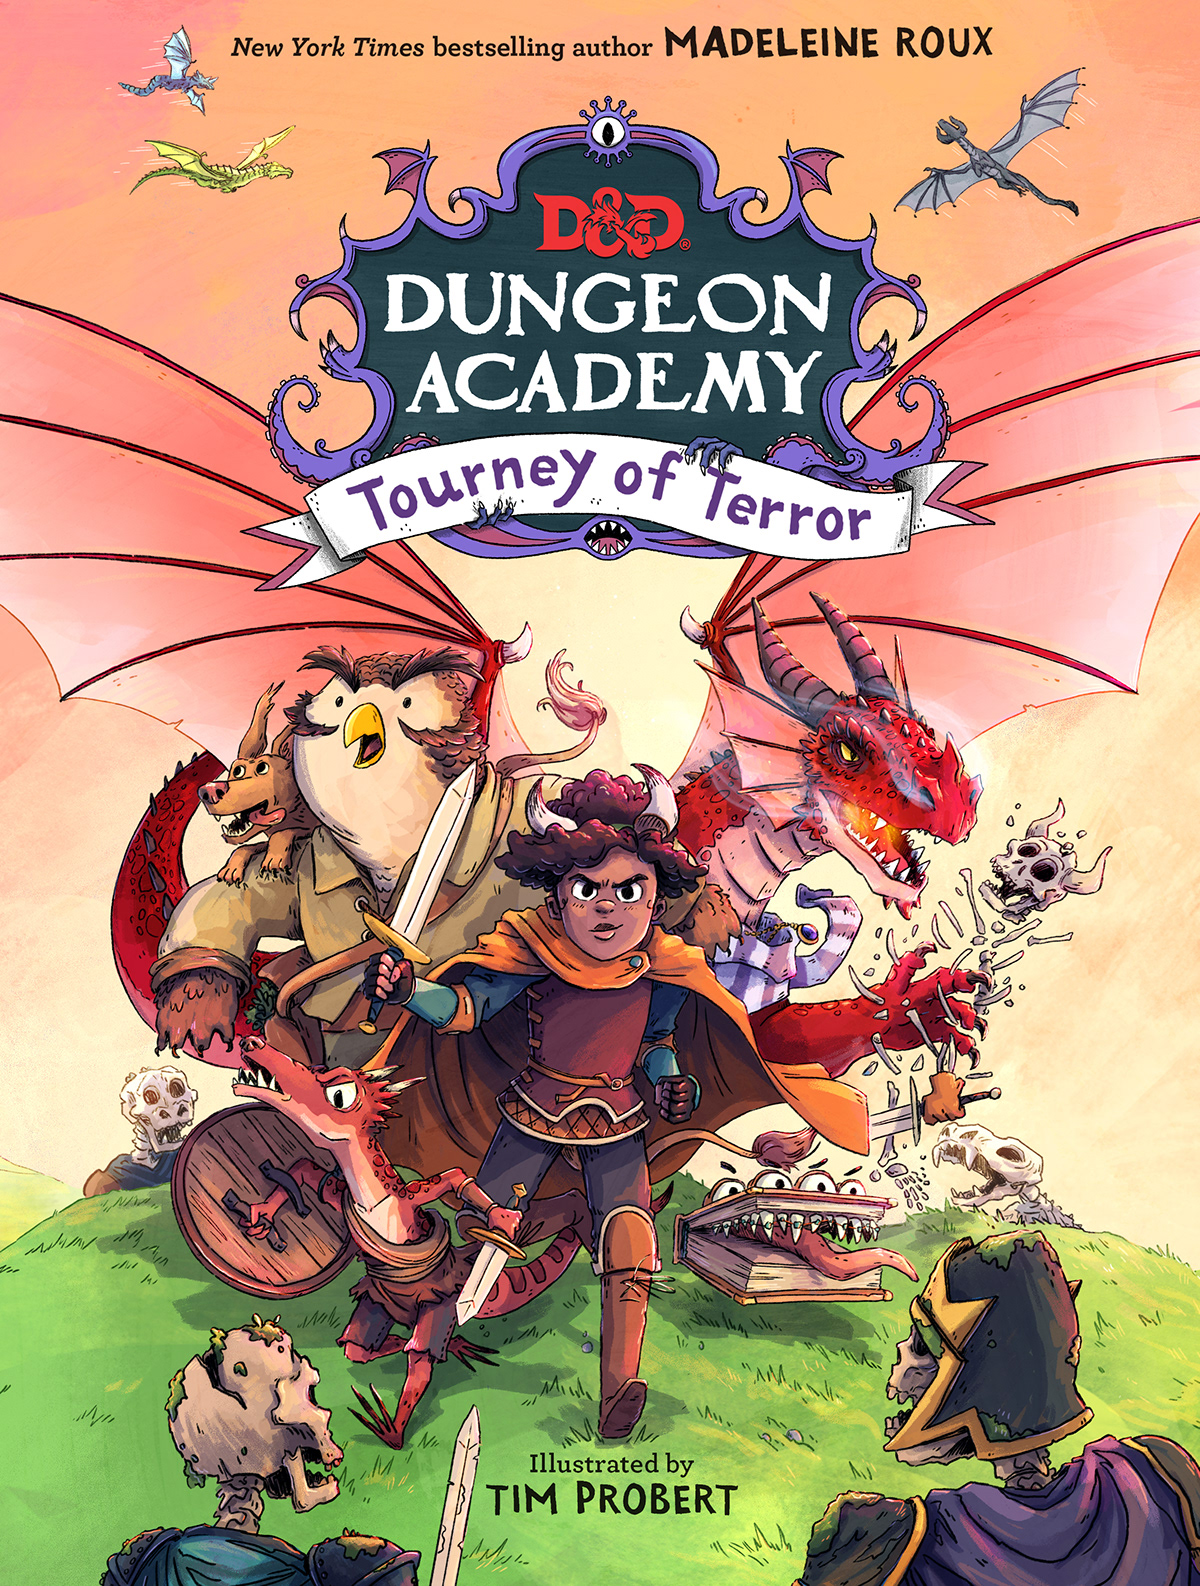 D&D dungeons & dragons Dungeons and Dragons fantasy Middle Grade Book